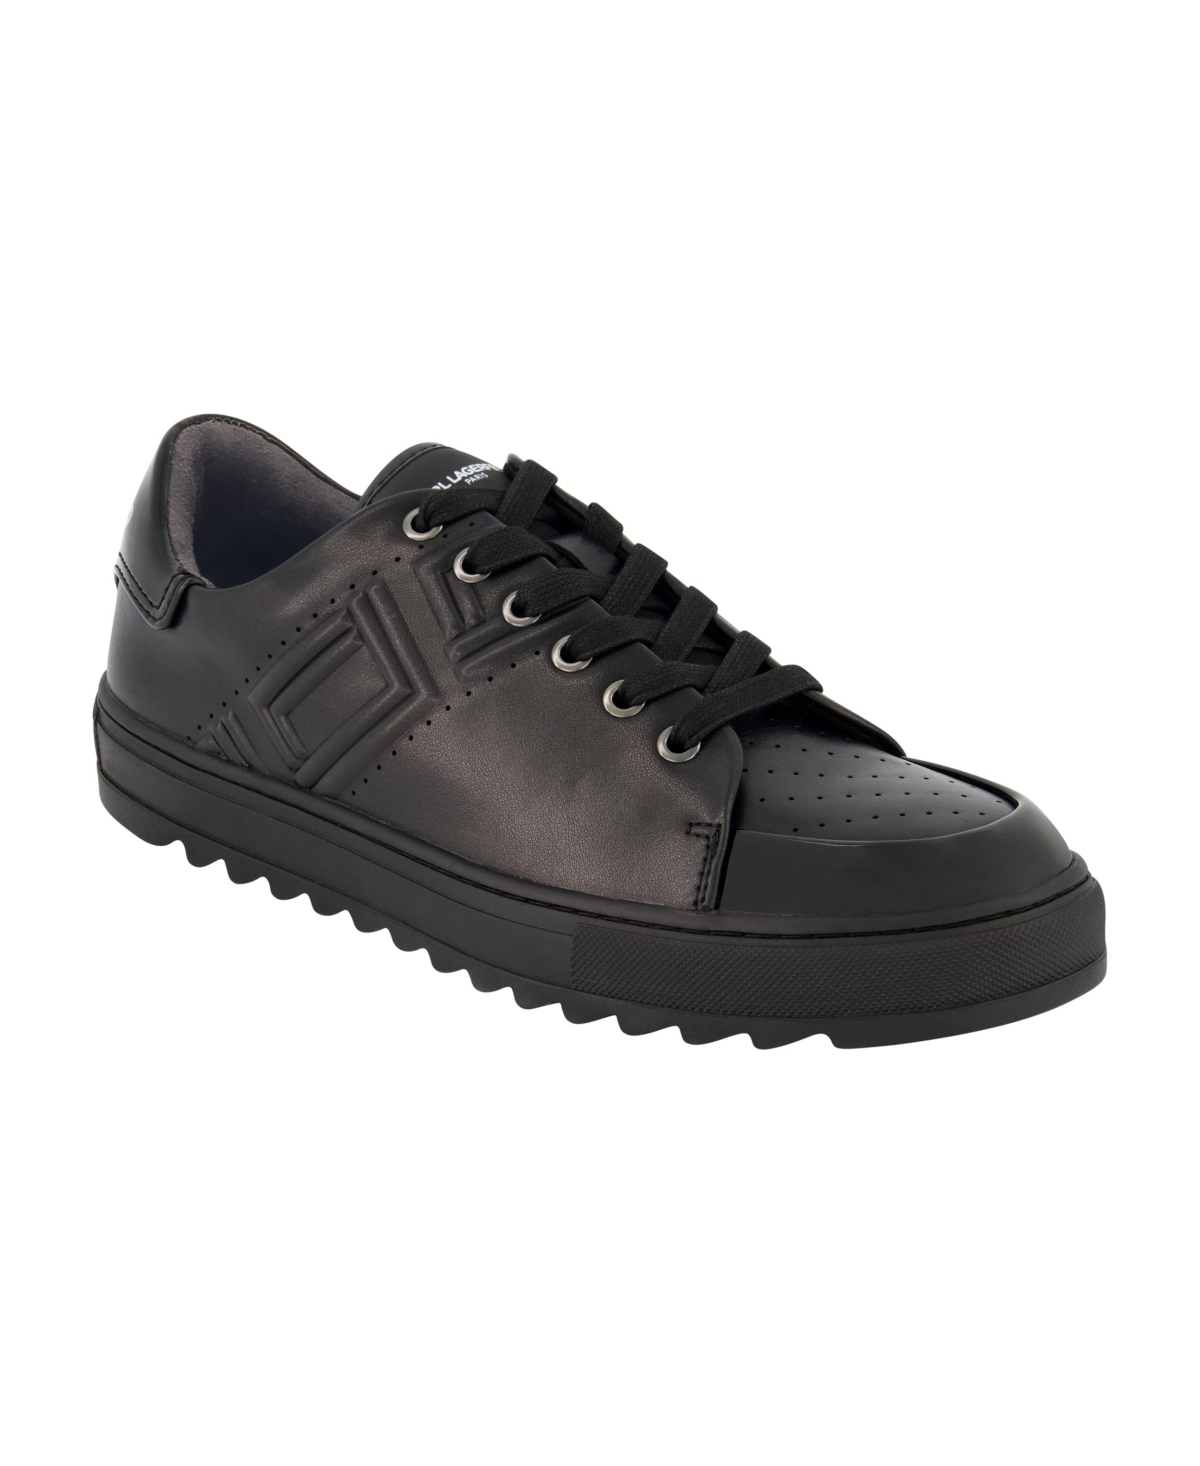 Men's Side Embossed Logo and Patent Detail Leather Sneakers - Black